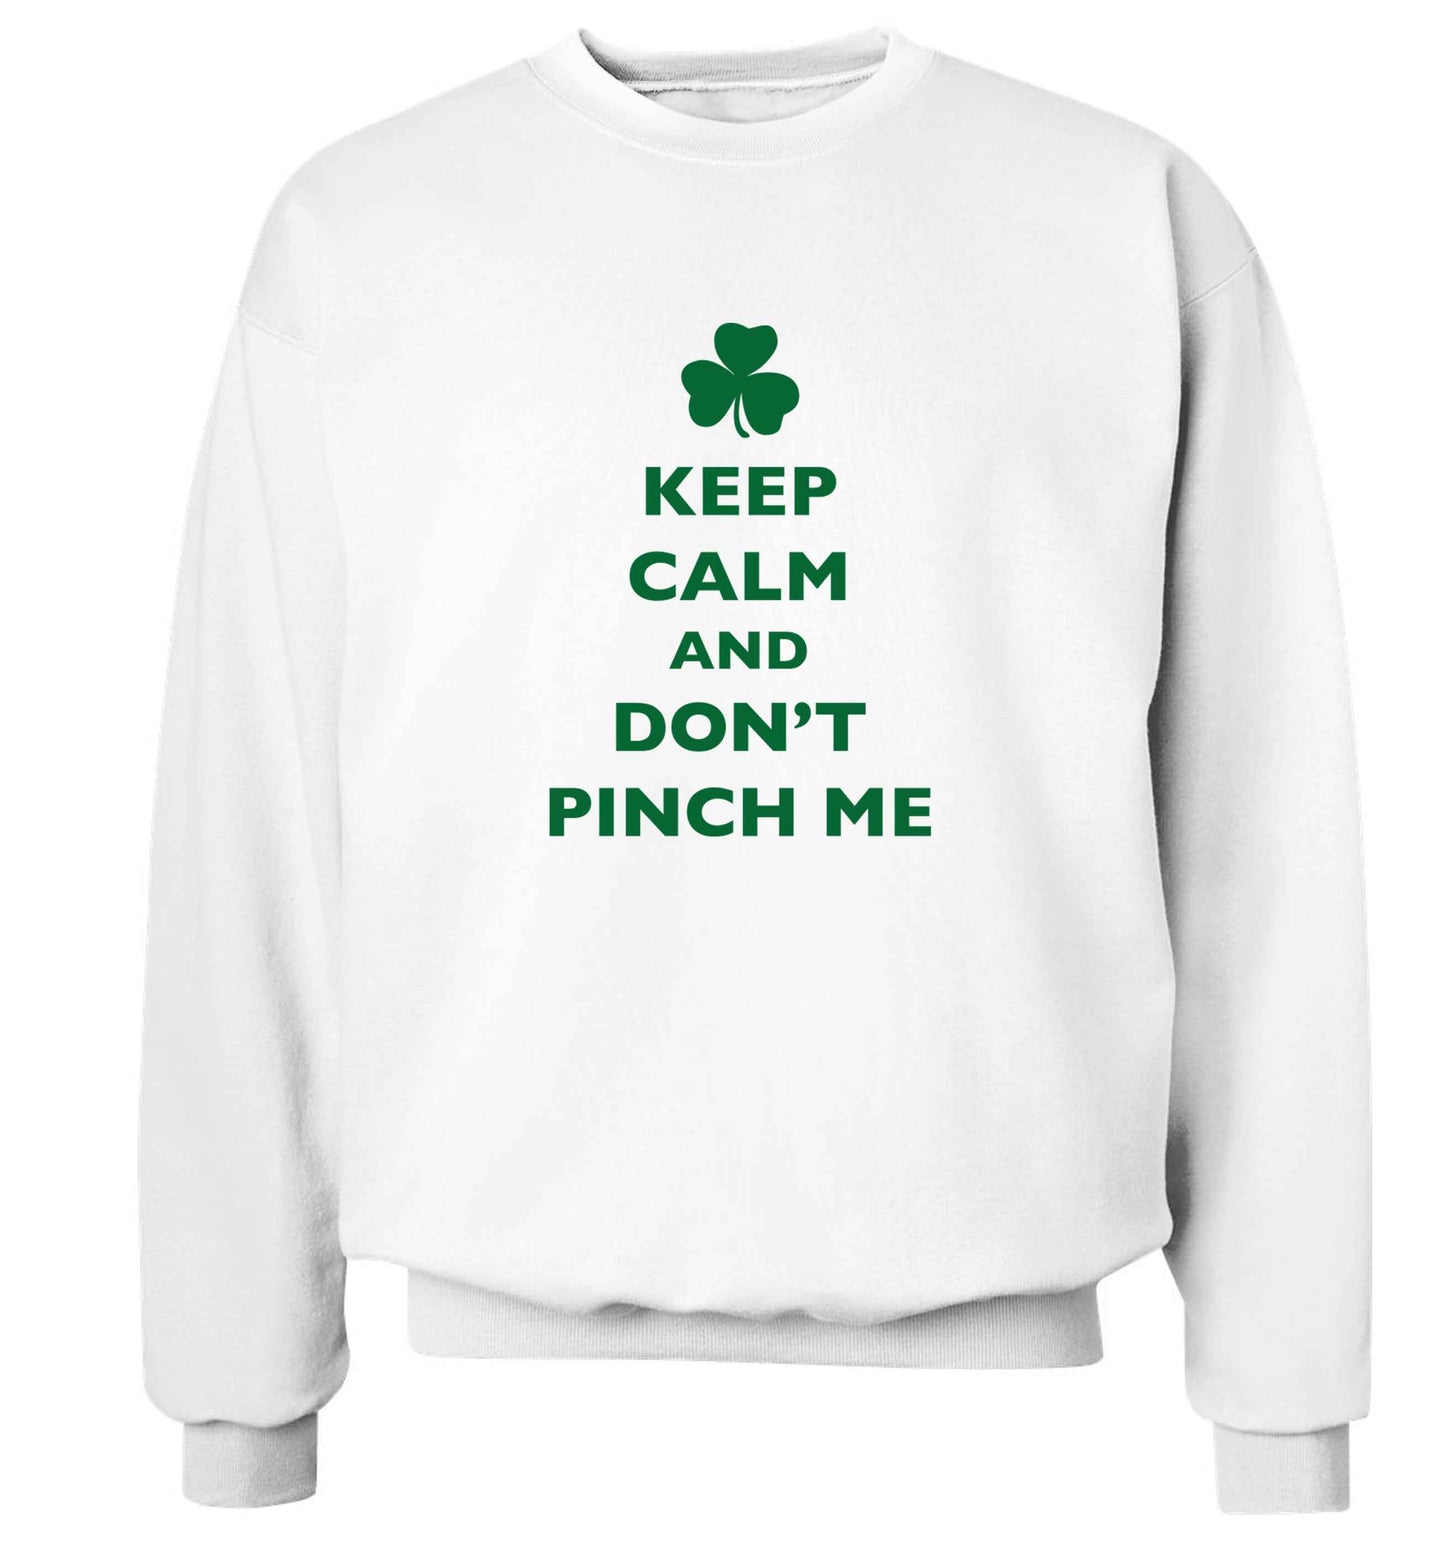 Keep calm and don't pinch me adult's unisex white sweater 2XL